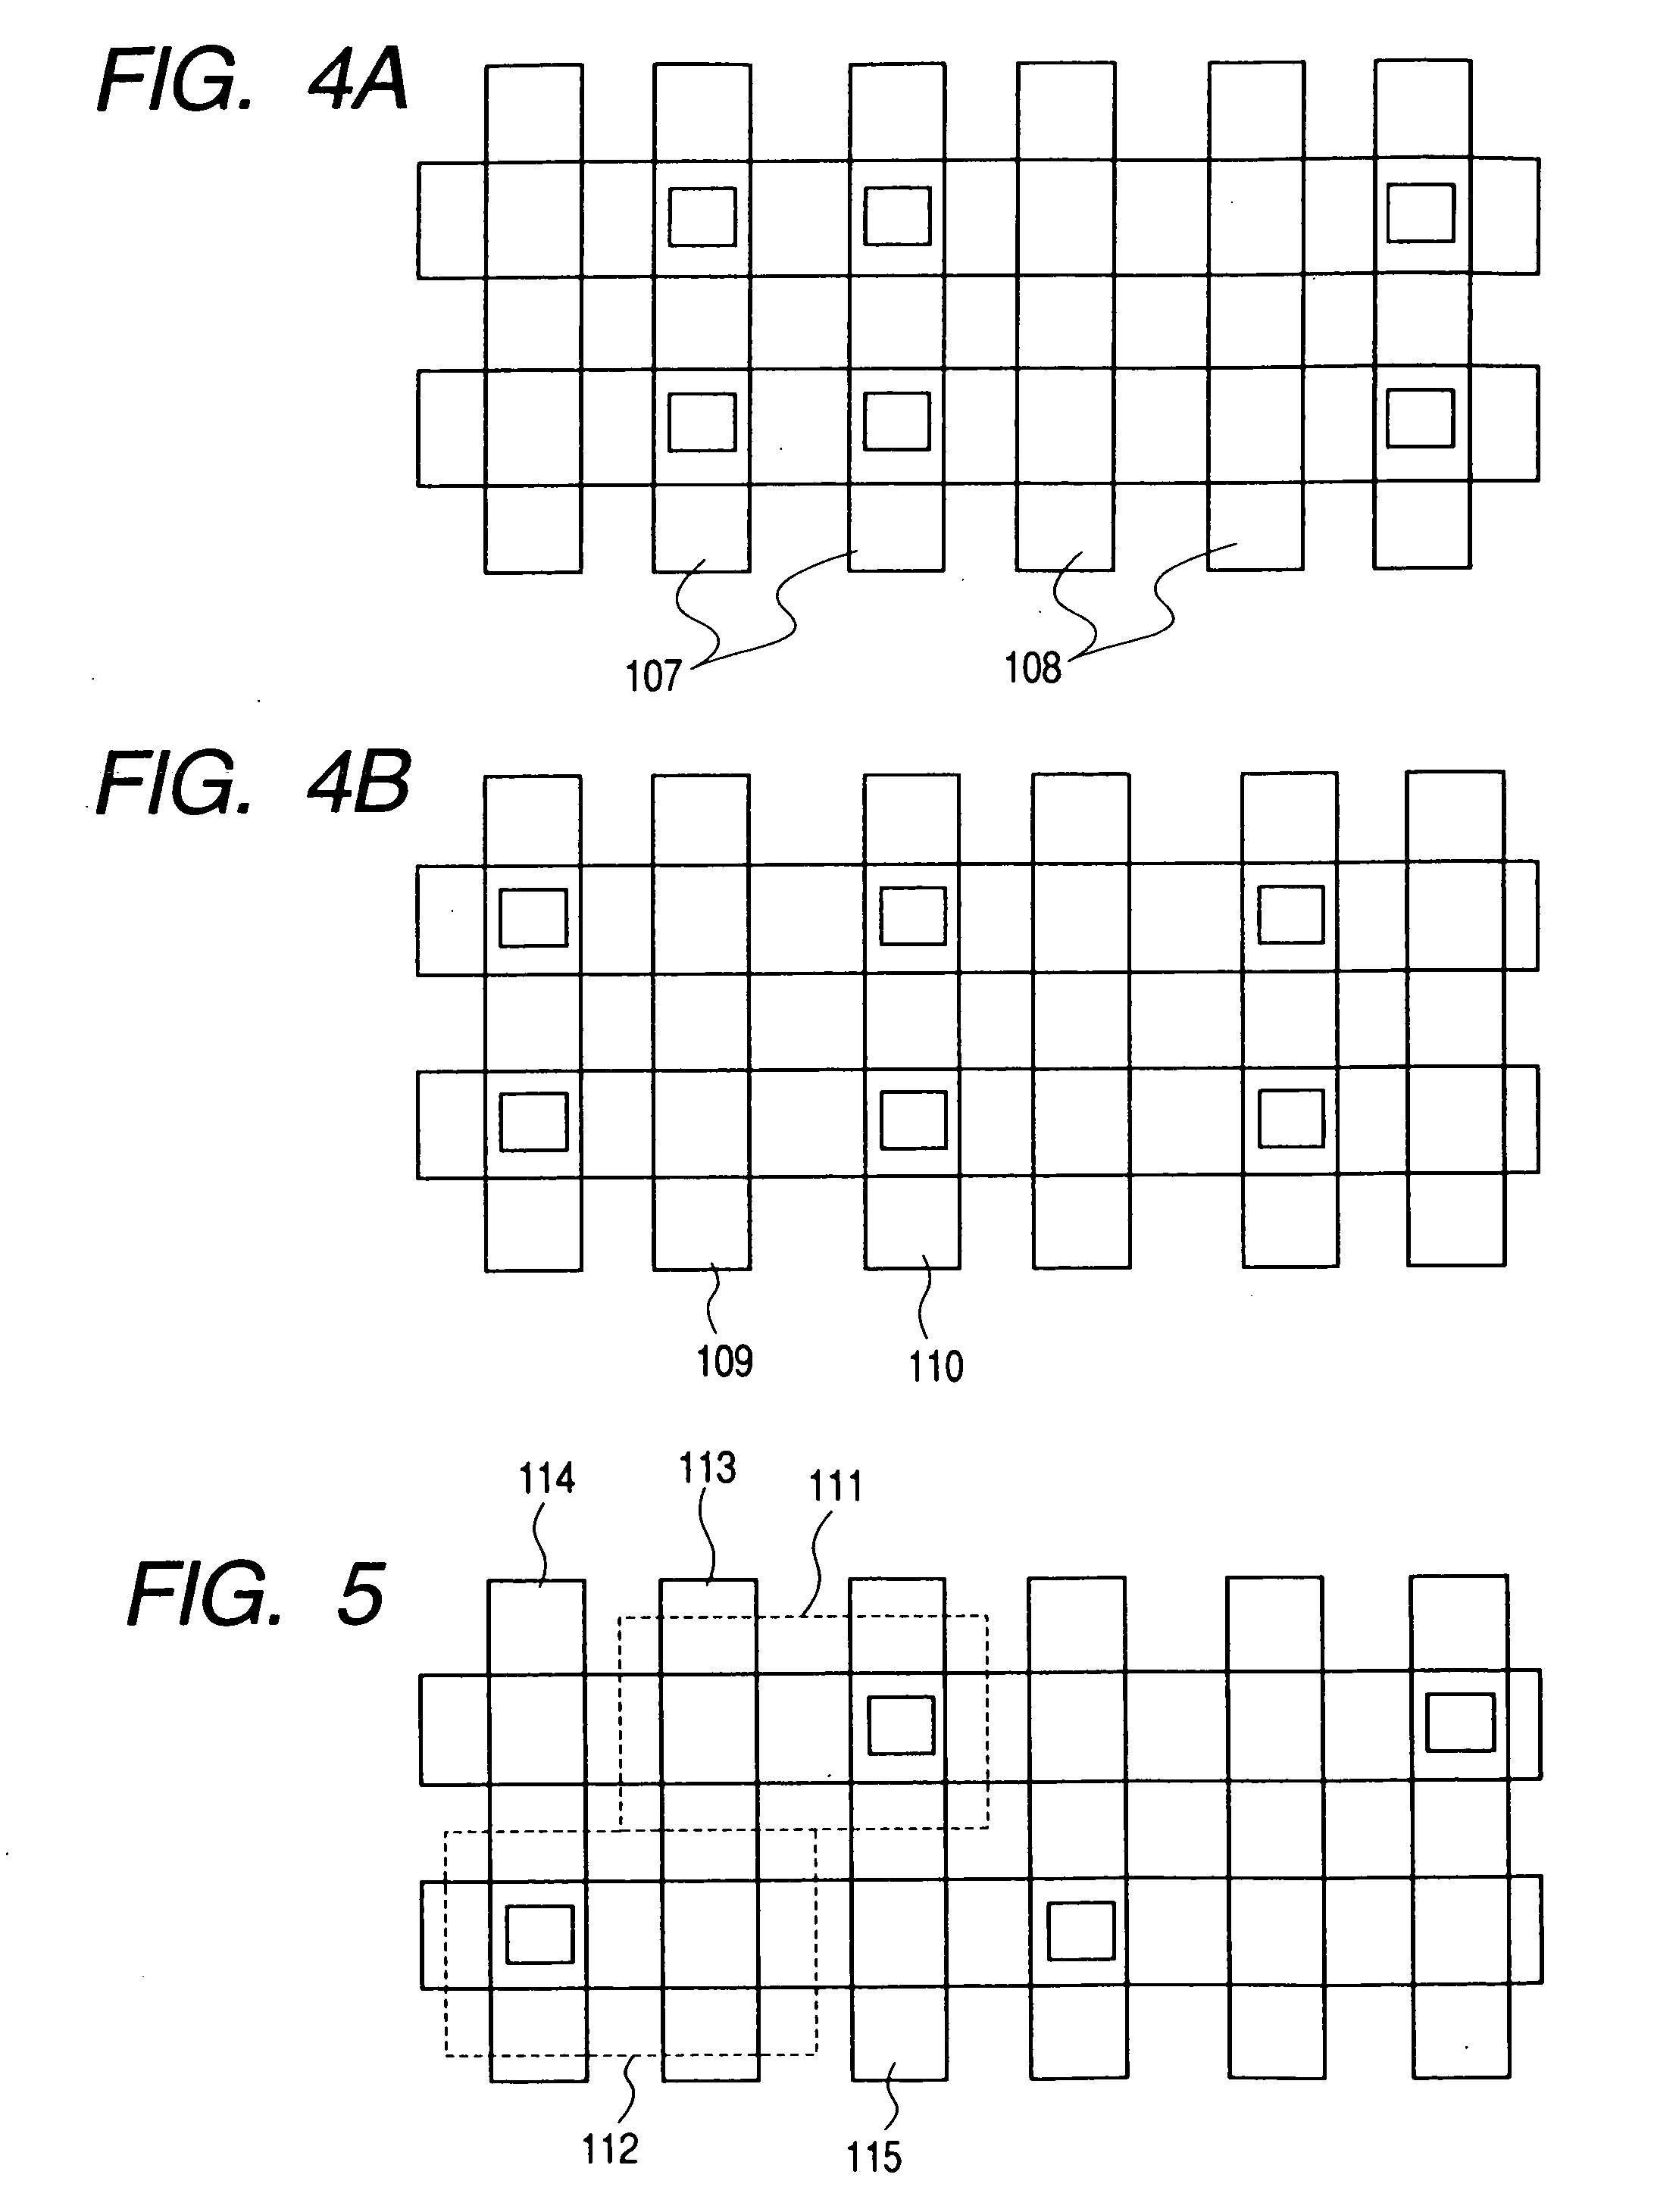 Gain cell type non-volatile memory having charge accumulating region charges or discharged by channel current from a thin film channel path